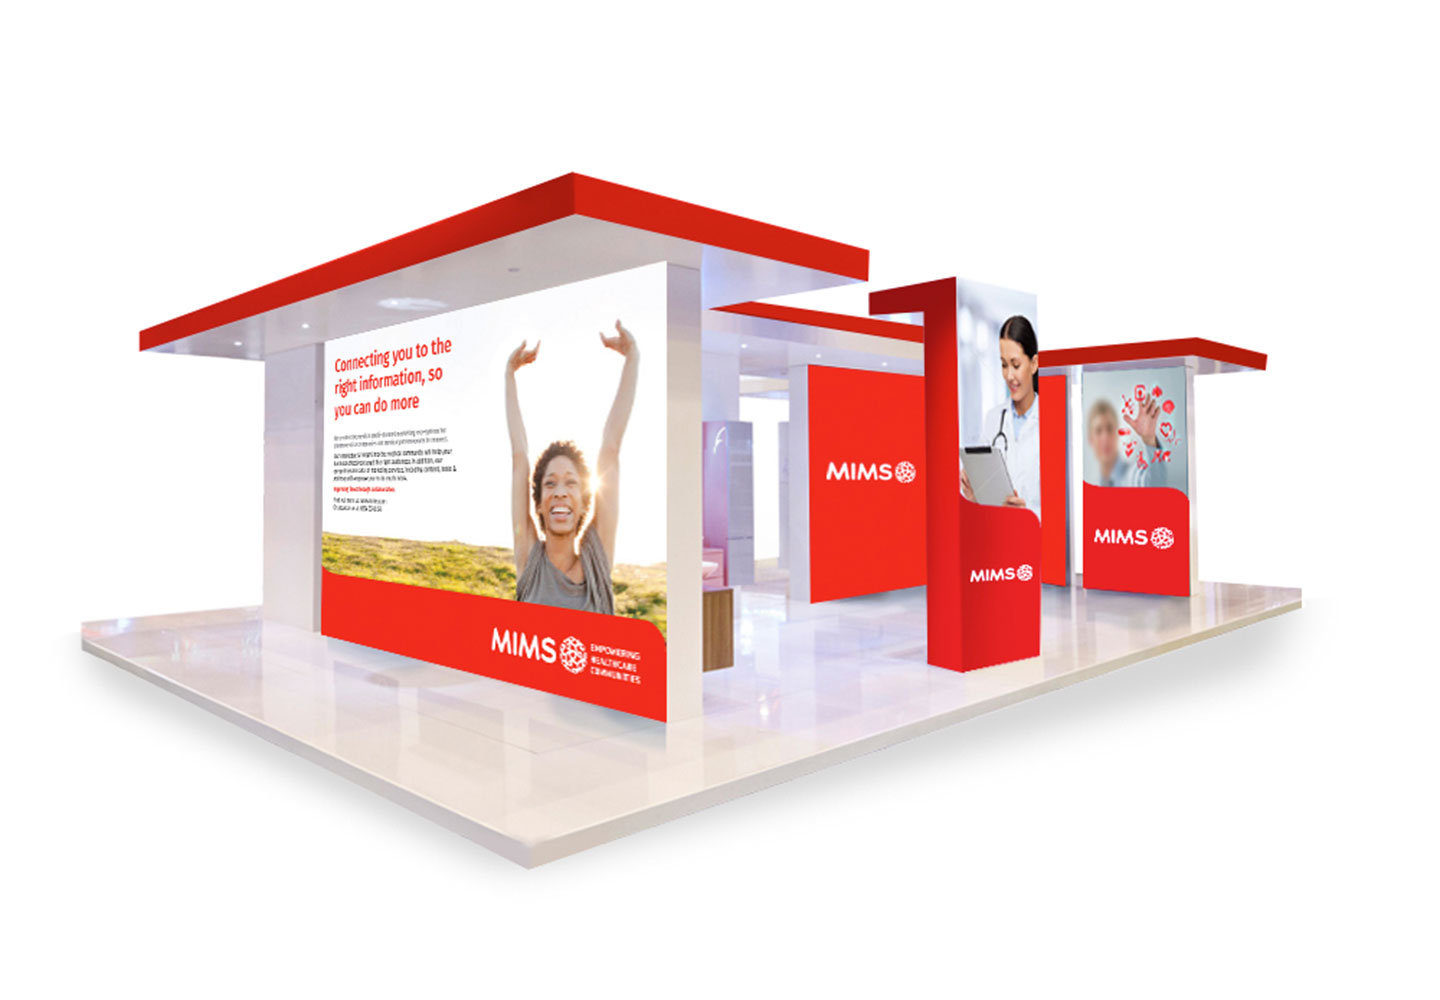 Brand Consultancy in Healthcare Industry. Exhibition design for MIMS.